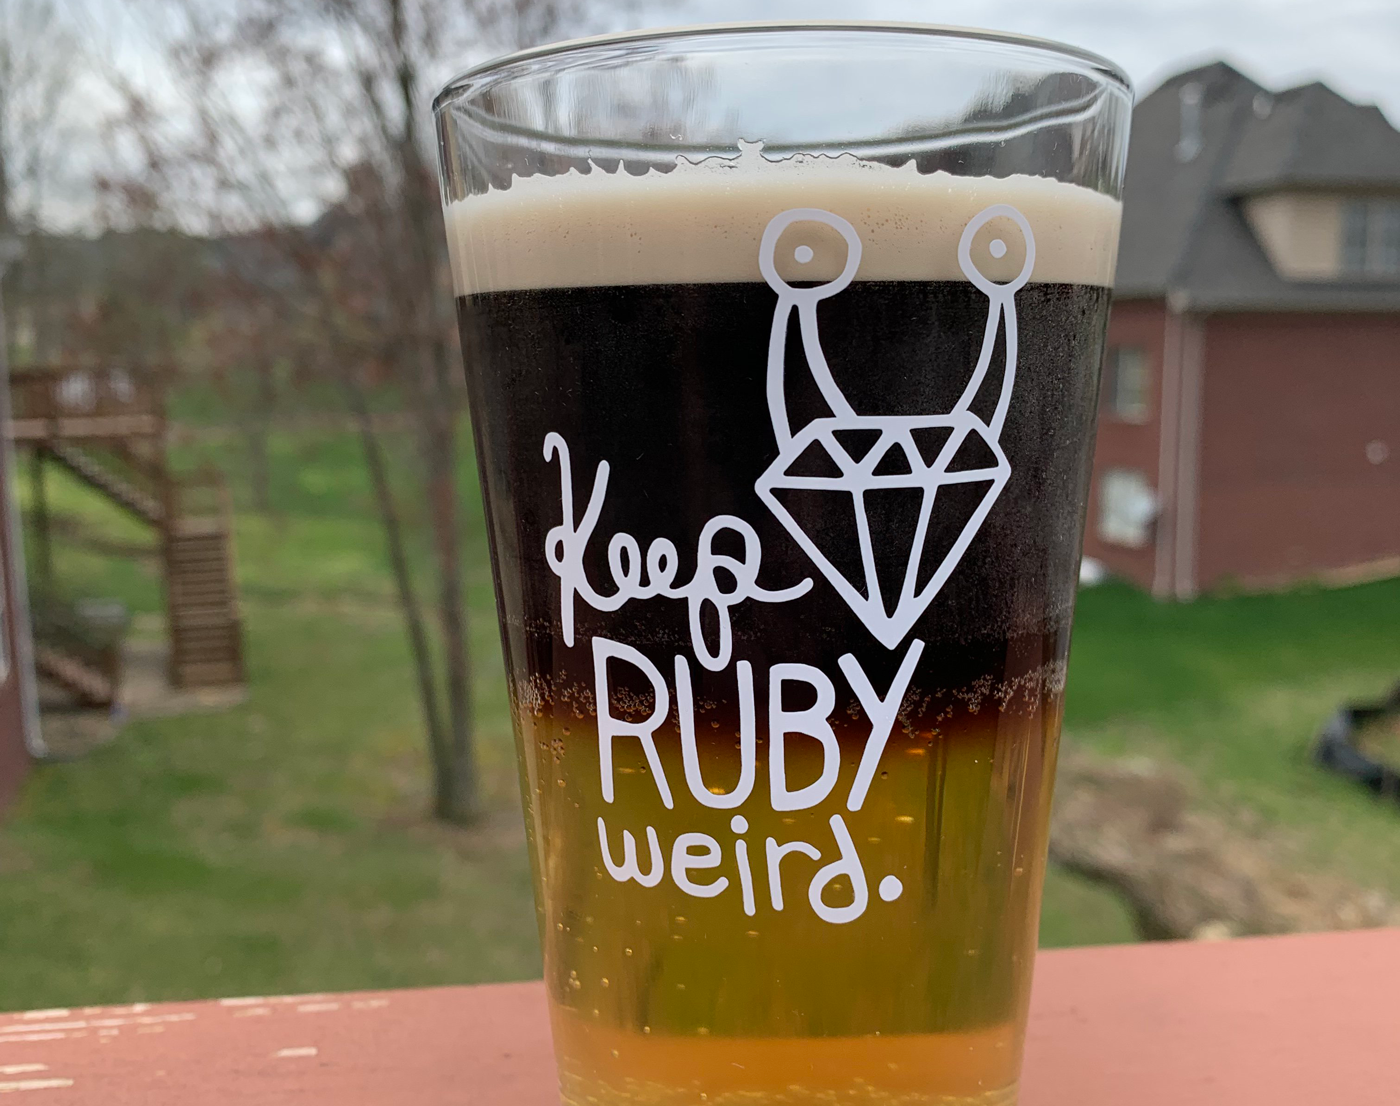 Keep Ruby Weird logo on a glass full of beer